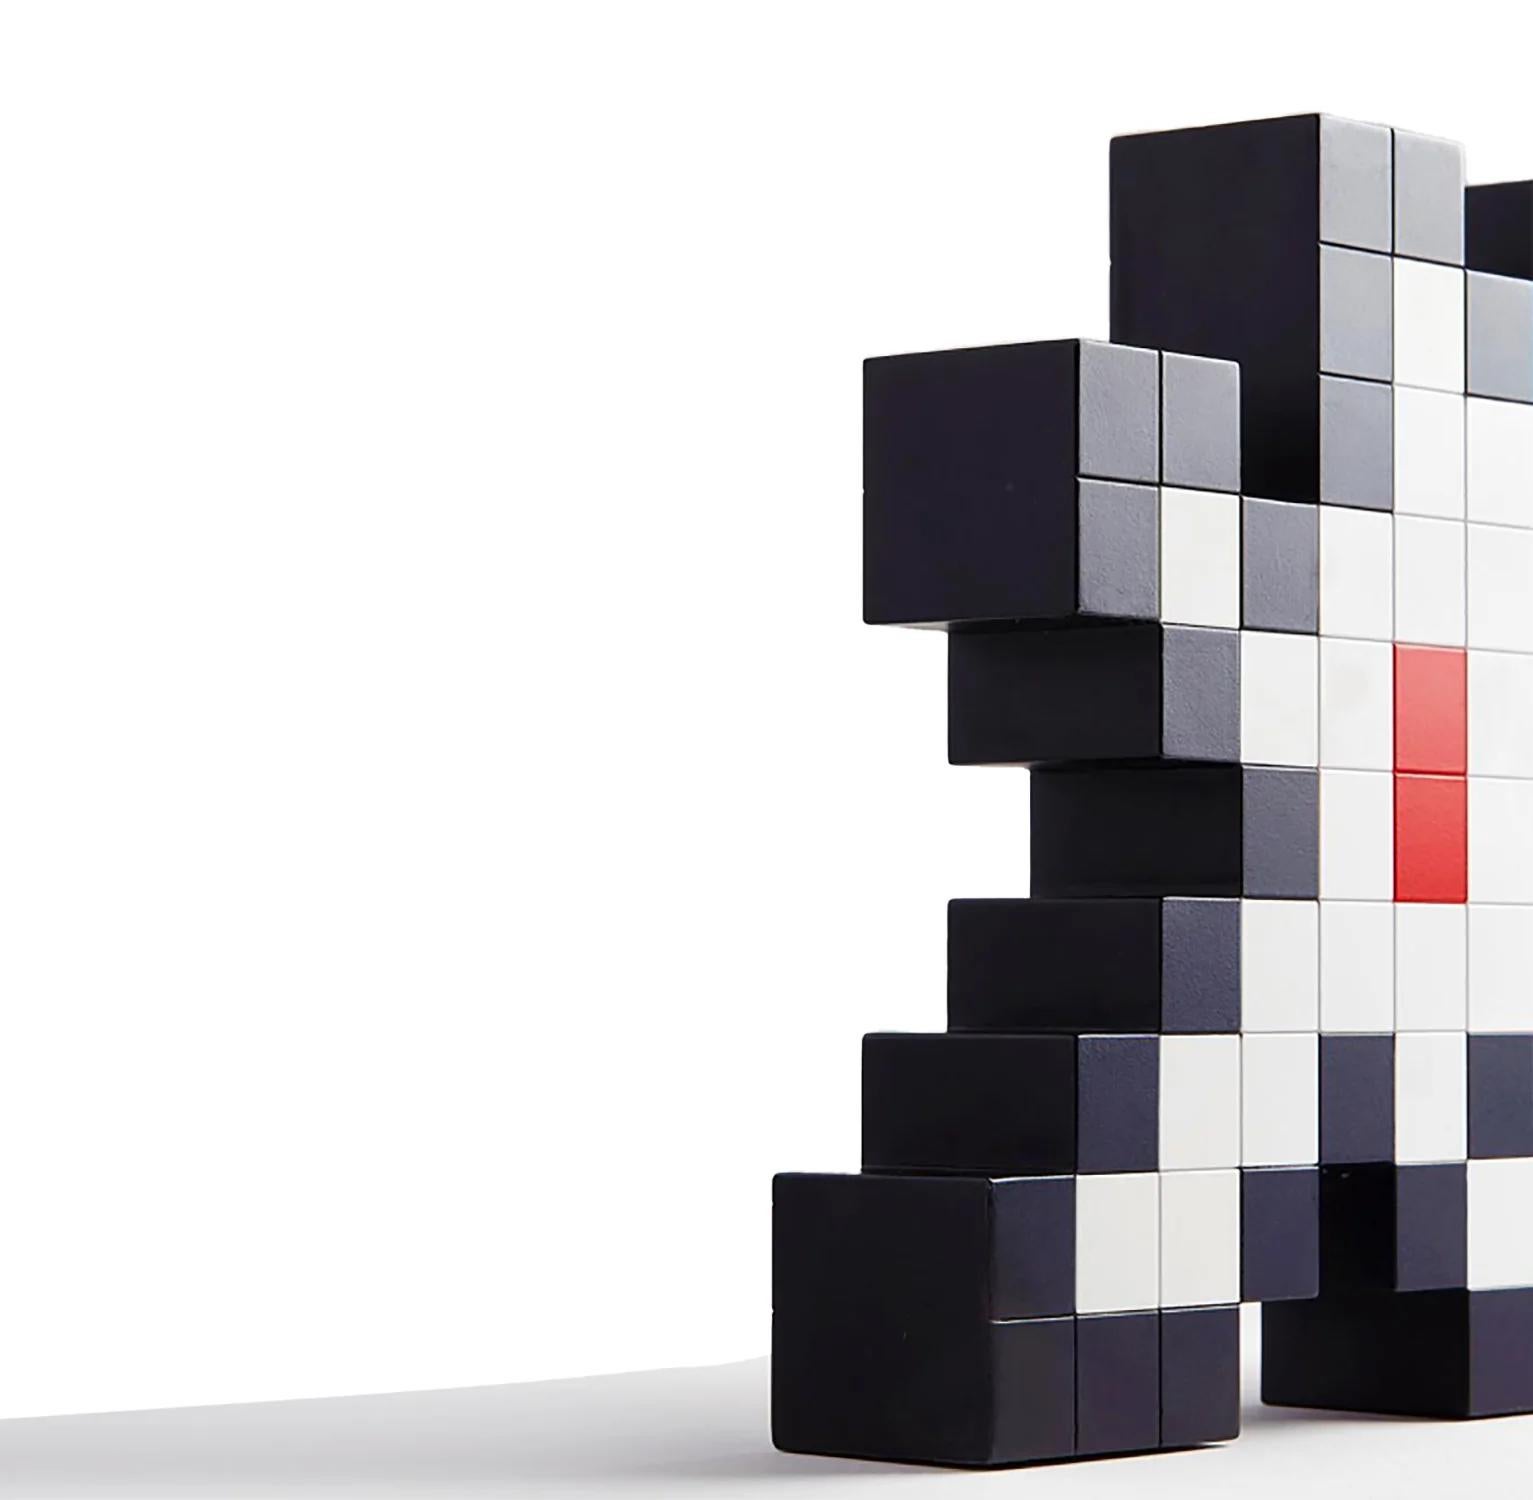 3D LITTLE BIG SPACE

Date of creation: 2022
Medium: Vinyl sculpture
Edition: 5000
Size: 28 x 20 x 4 cm
Condition: New, inside its sealed original box

This is the first vinyl sculpture created by Invader. Loyal to his tile making works, this